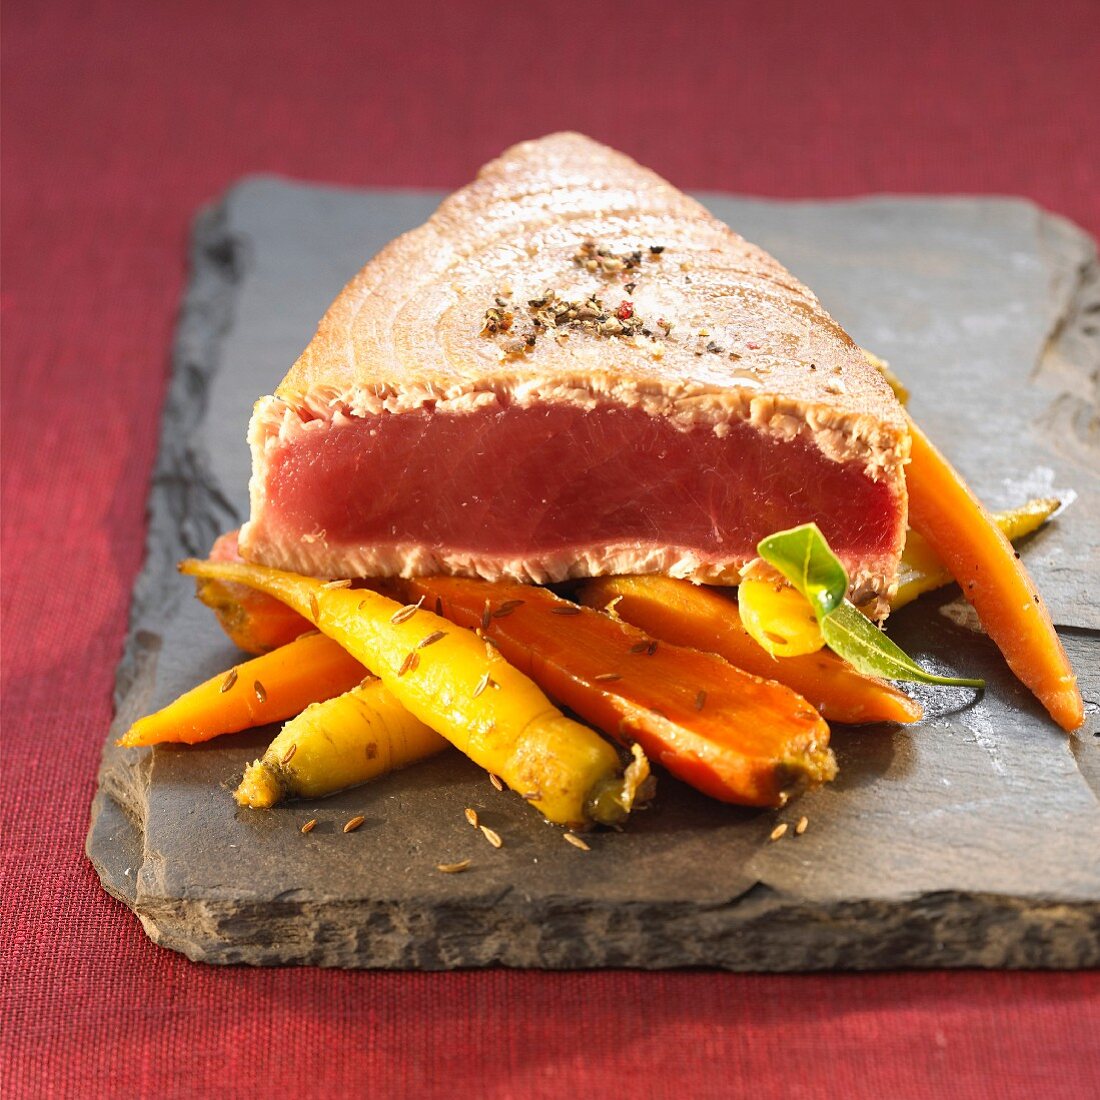 Grilled tuna and a carrot medley with caraway